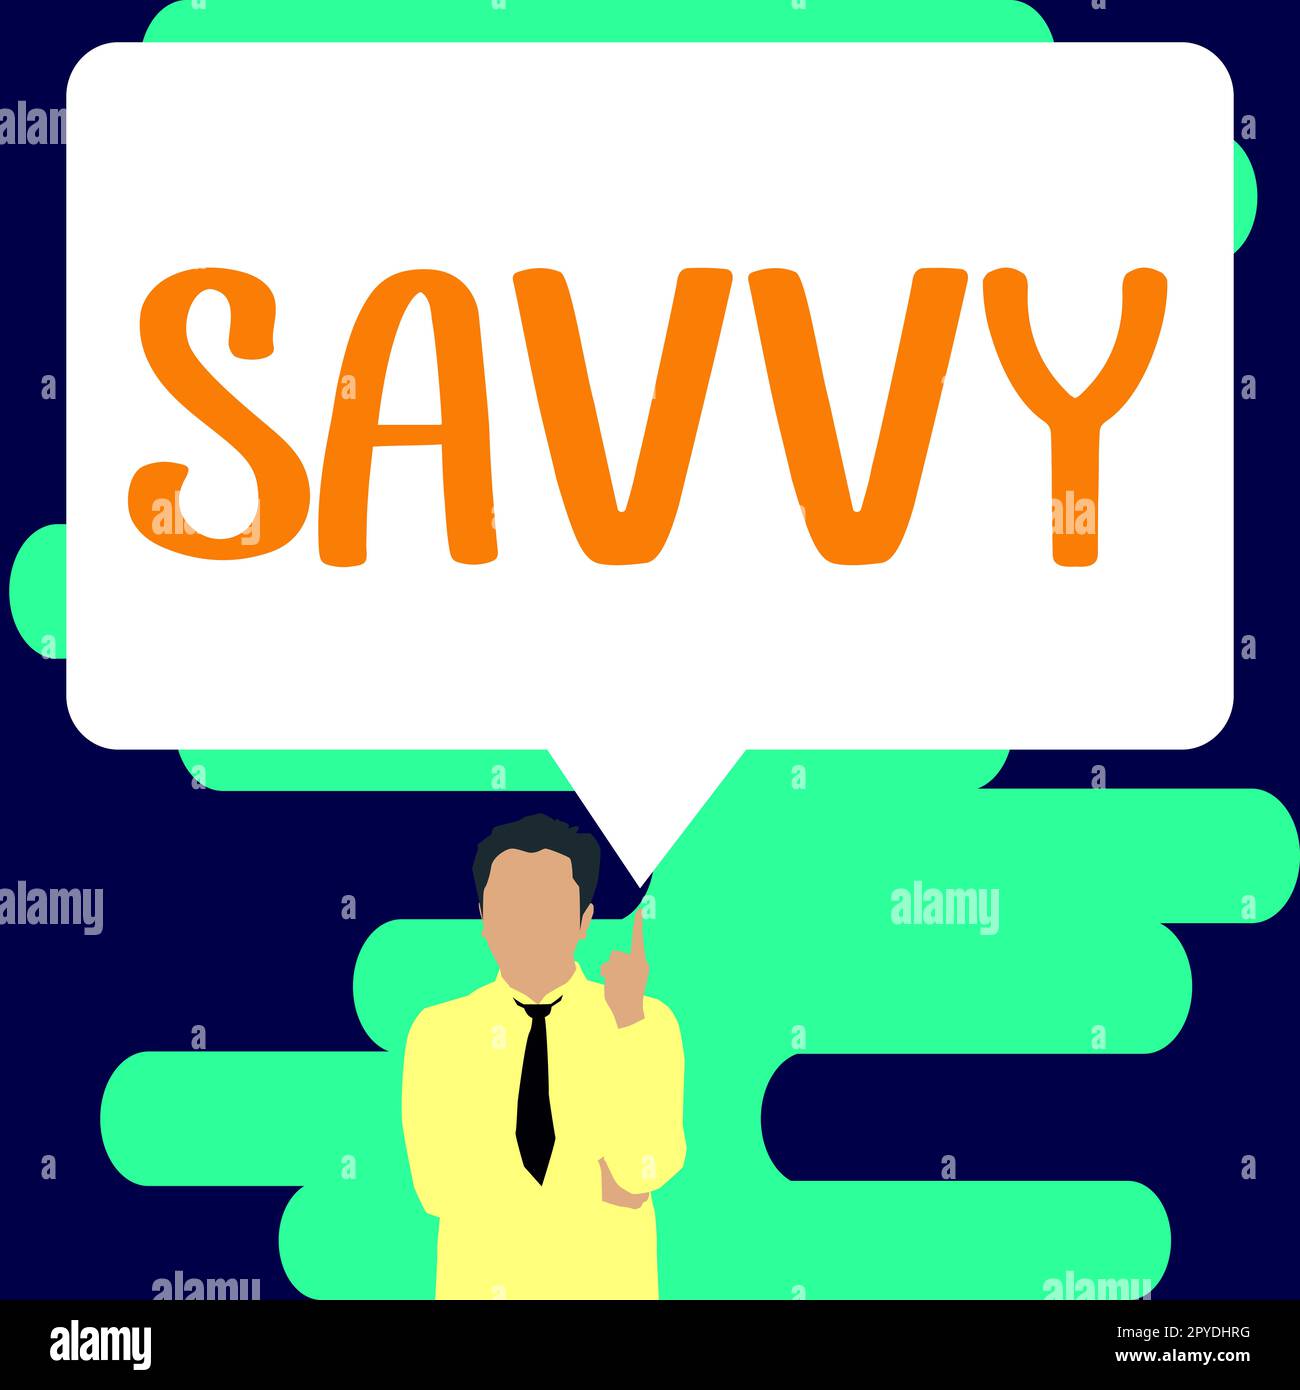 Text sign showing Savvy. Business idea having perception, comprehension in practical matters Stock Photo